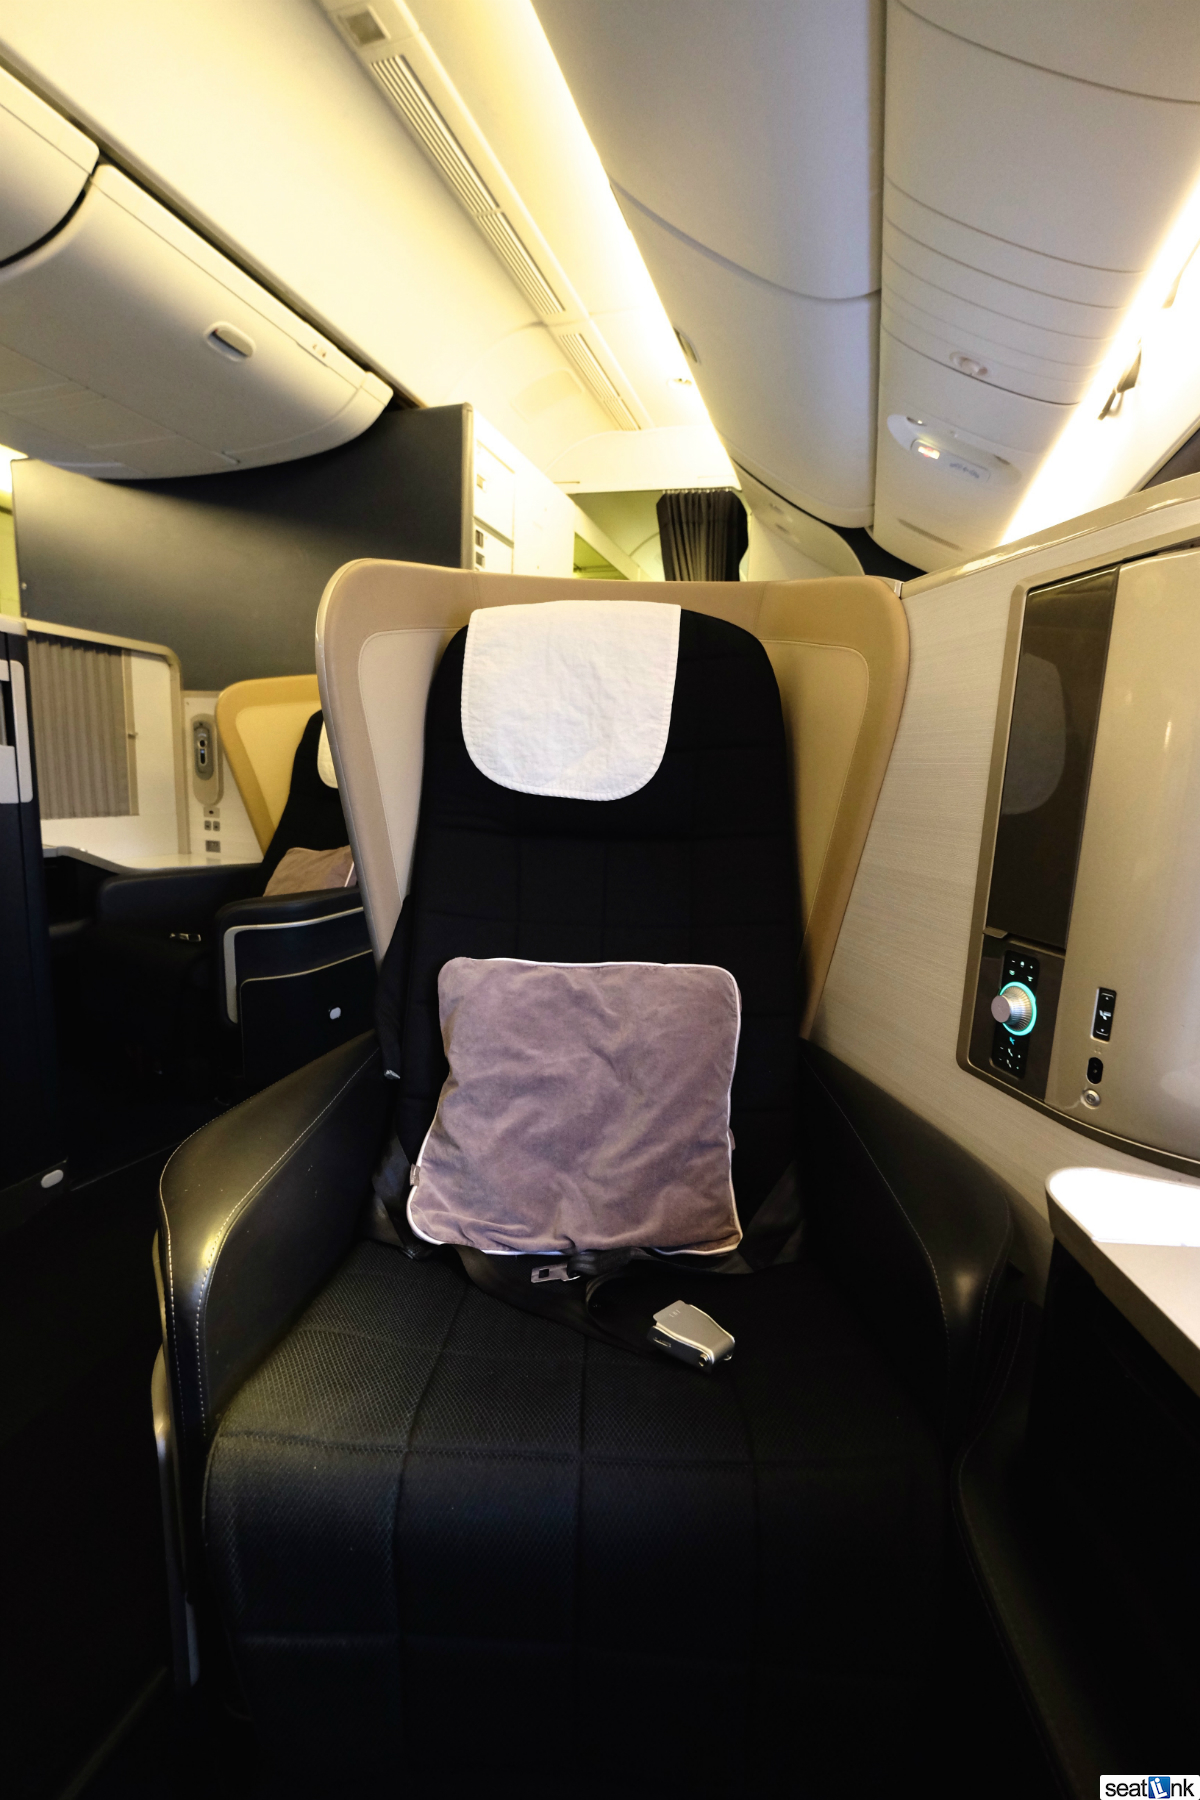 British Airways 777 First Class LHR to SEA [Review] - The Seatlink Blog